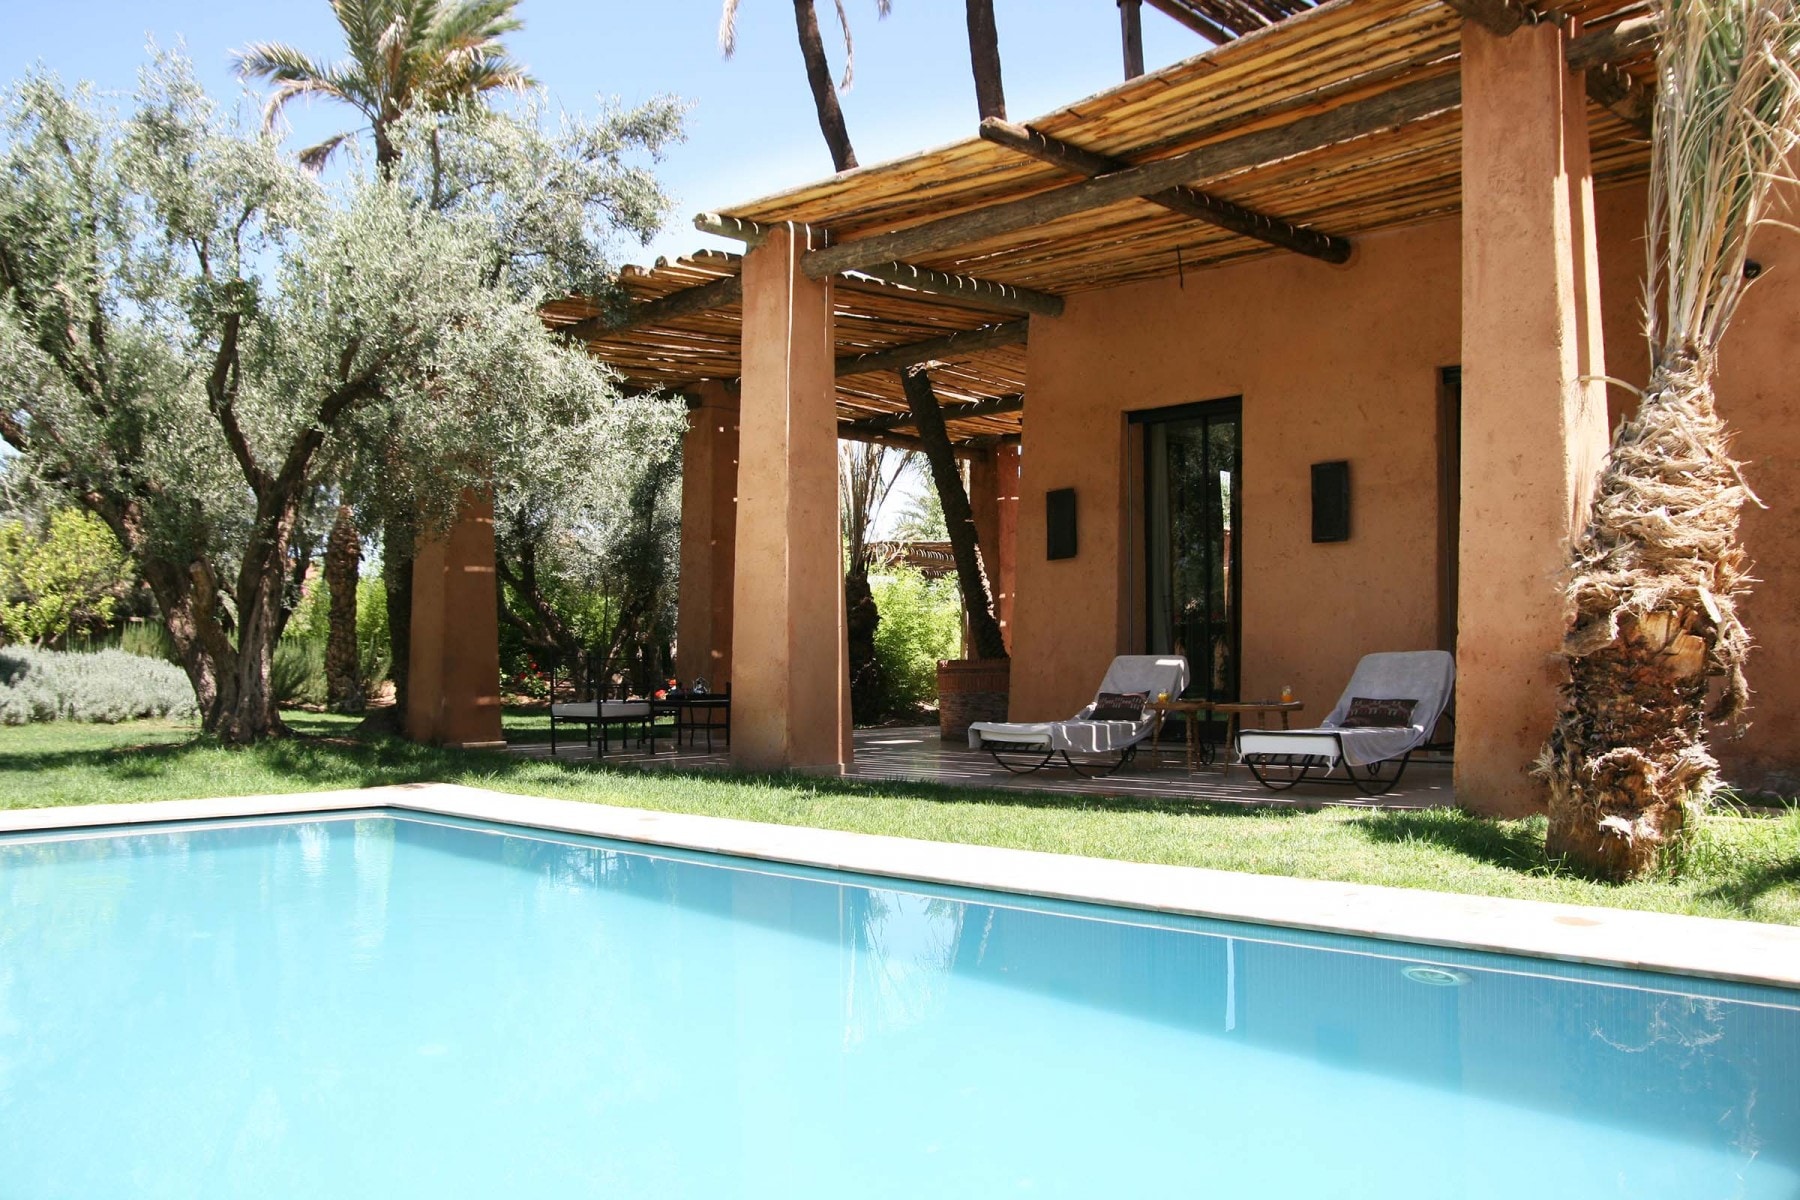 Comfortable Spacious Retreat with Own Pool and Terraces